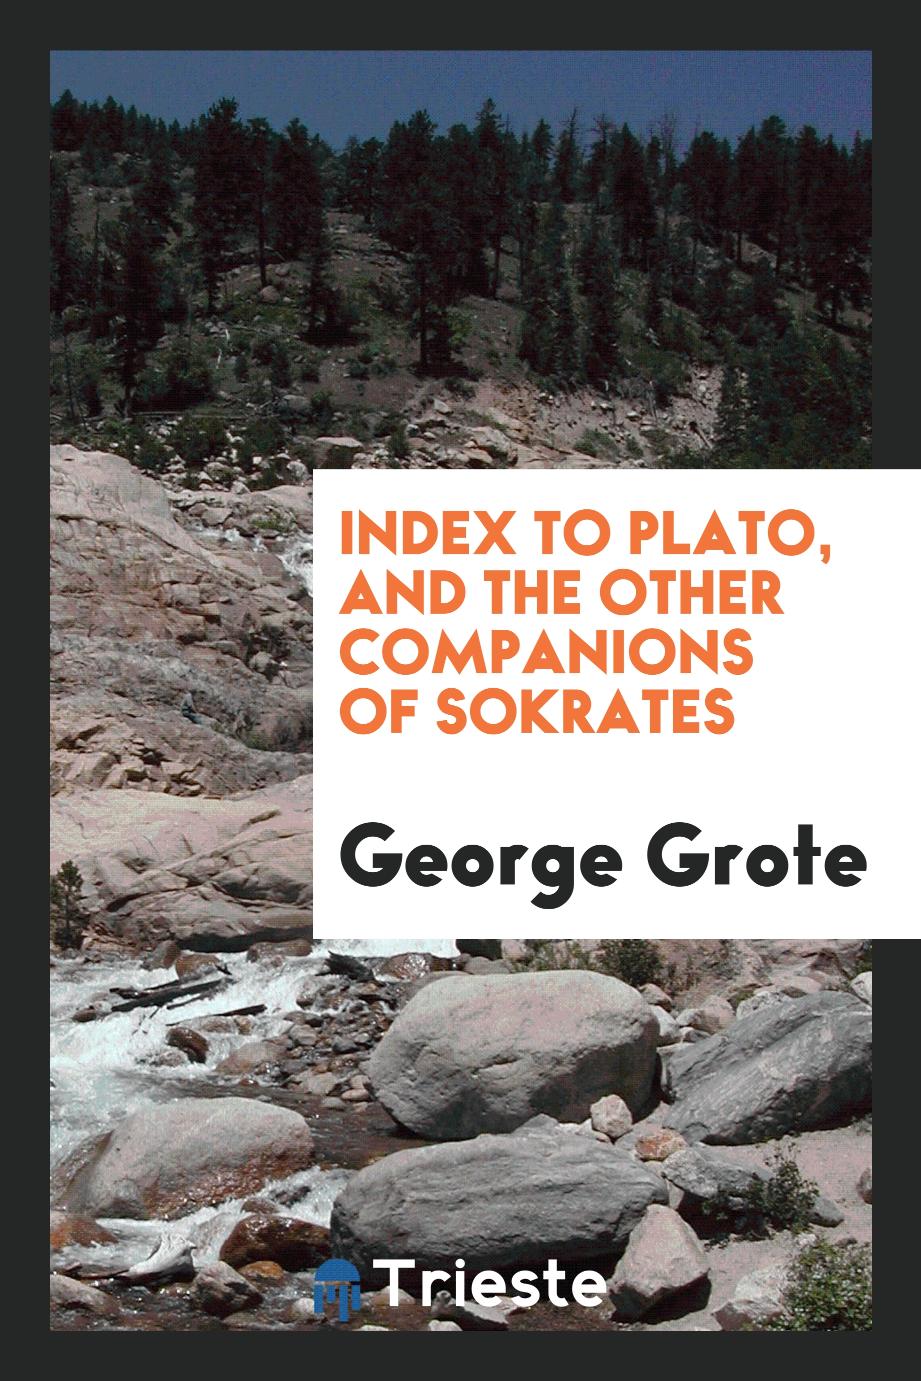 Index to Plato, and the Other Companions of Sokrates